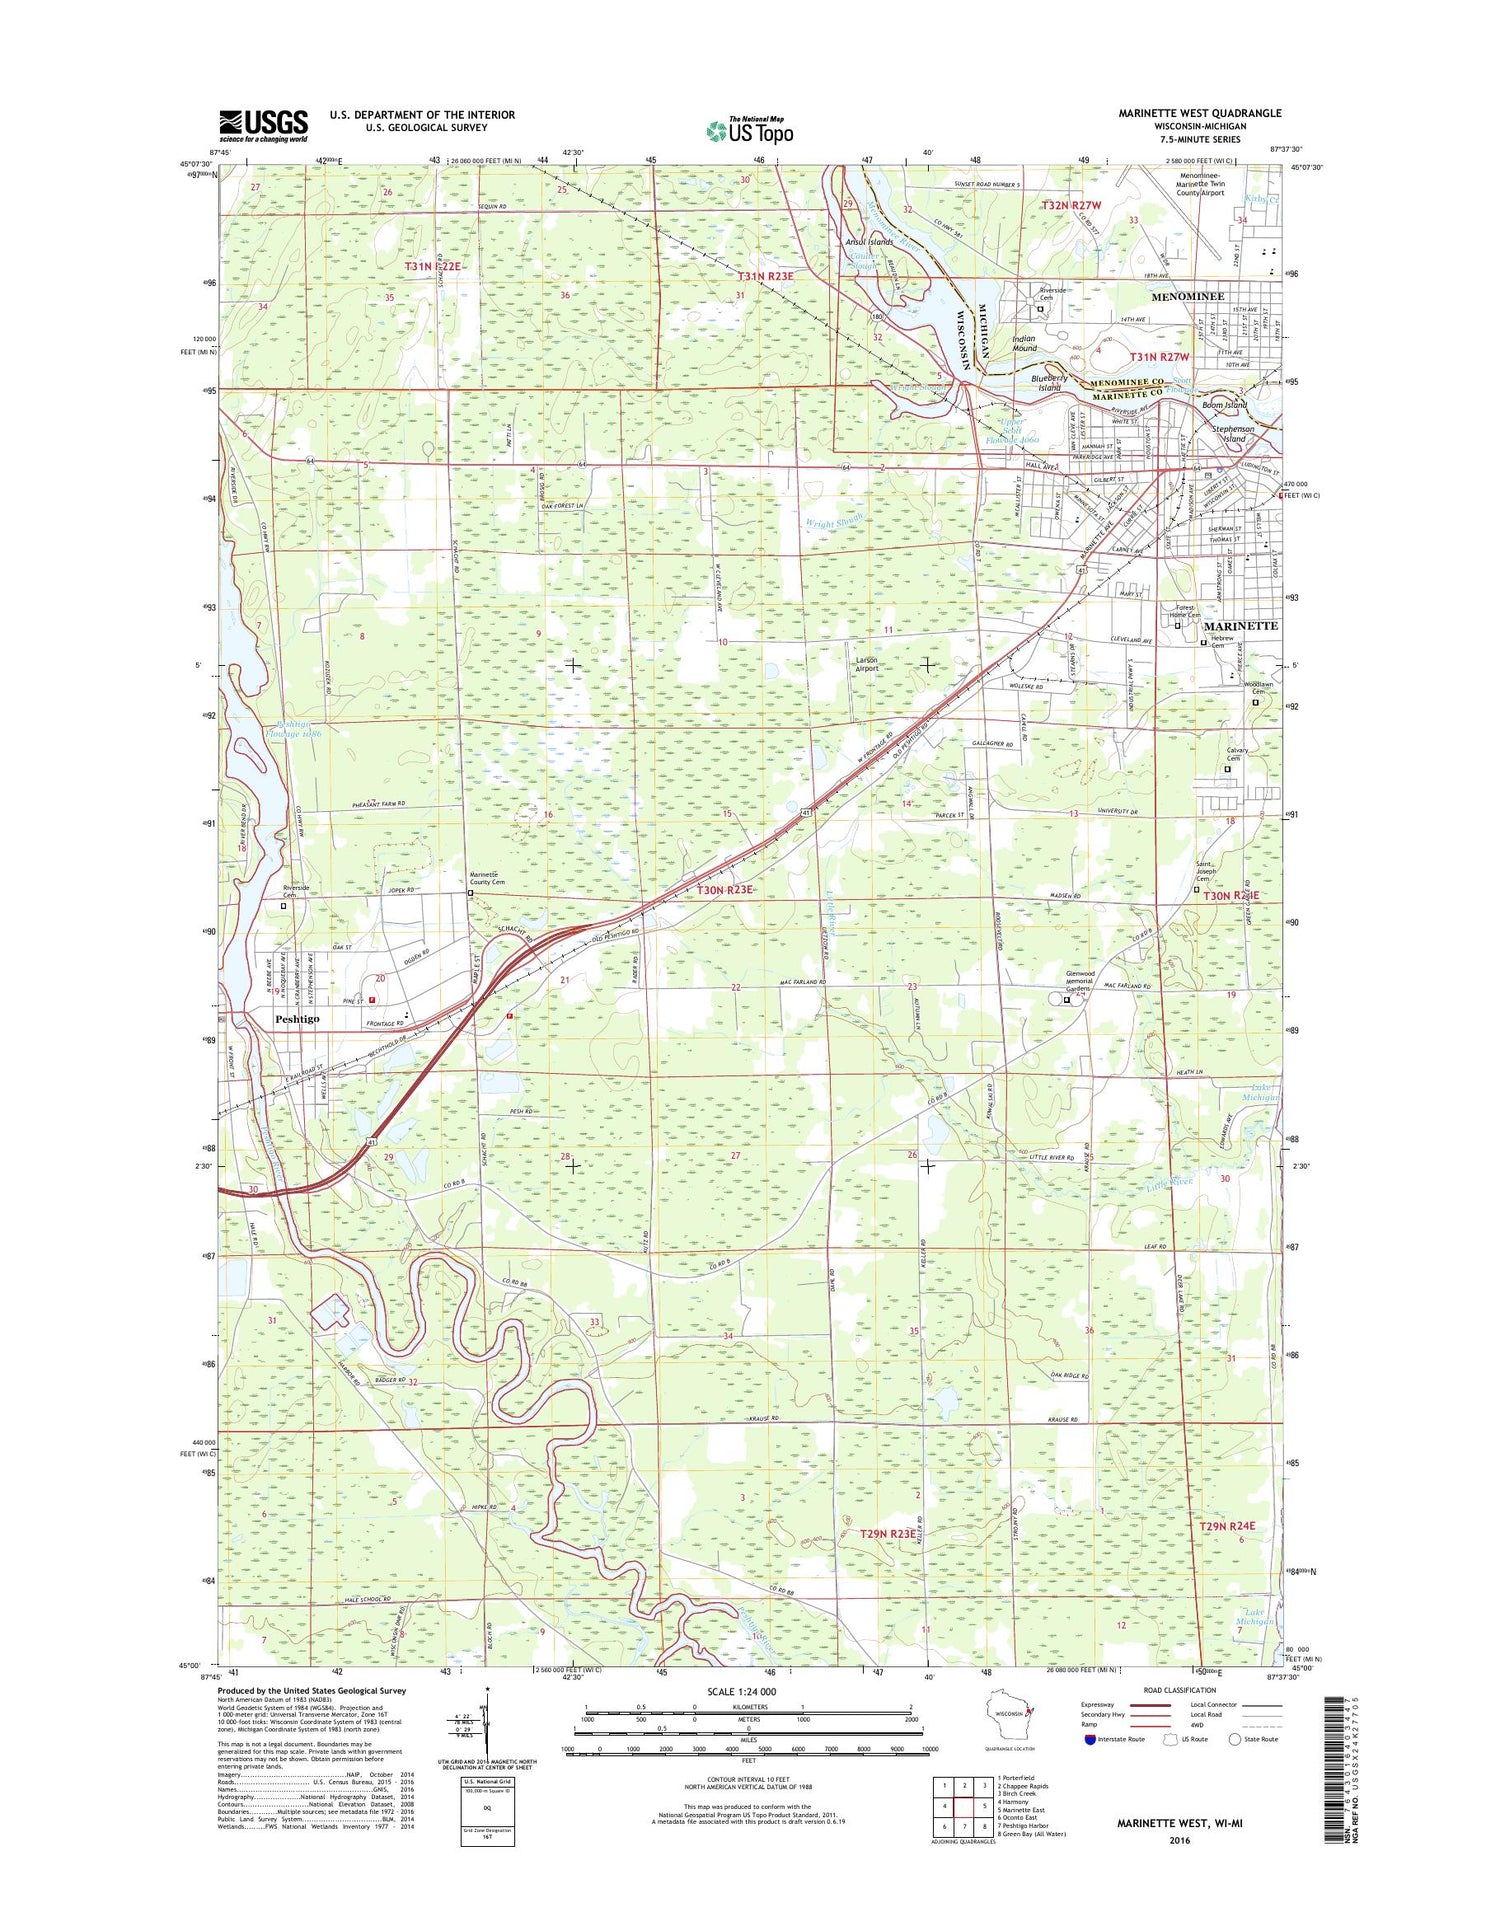 Marinette West Wisconsin US Topo Map Image